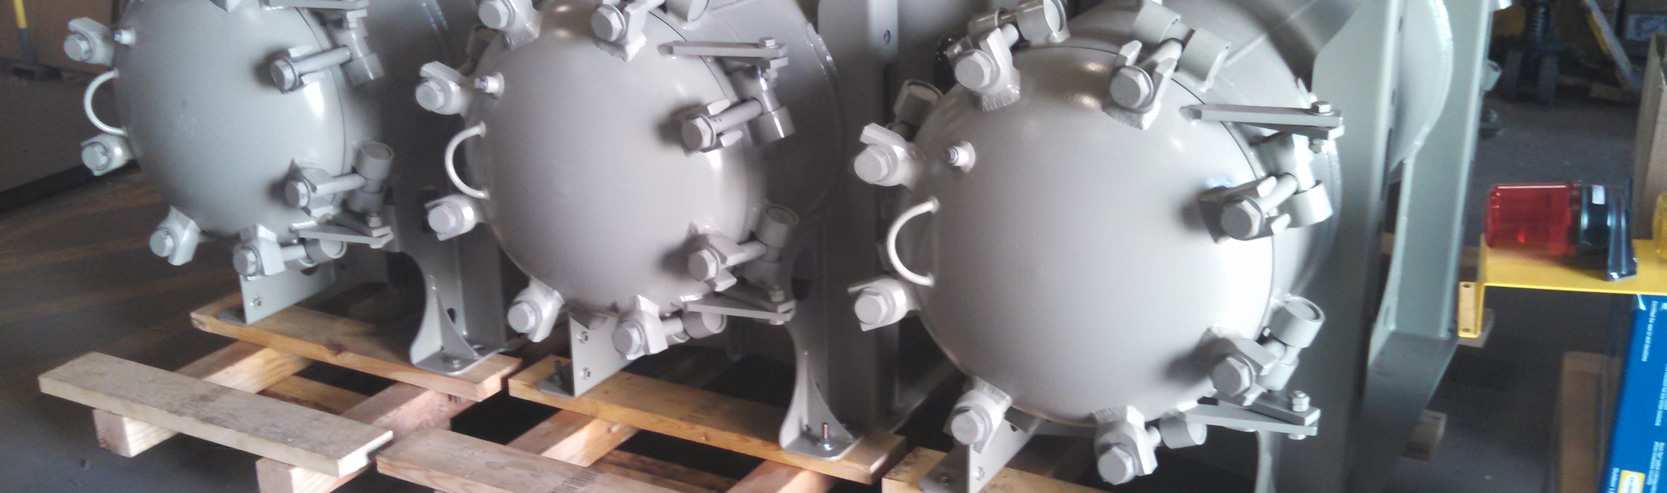 GSM Industrial Contract Manufacturing Locomotive Filter Housing